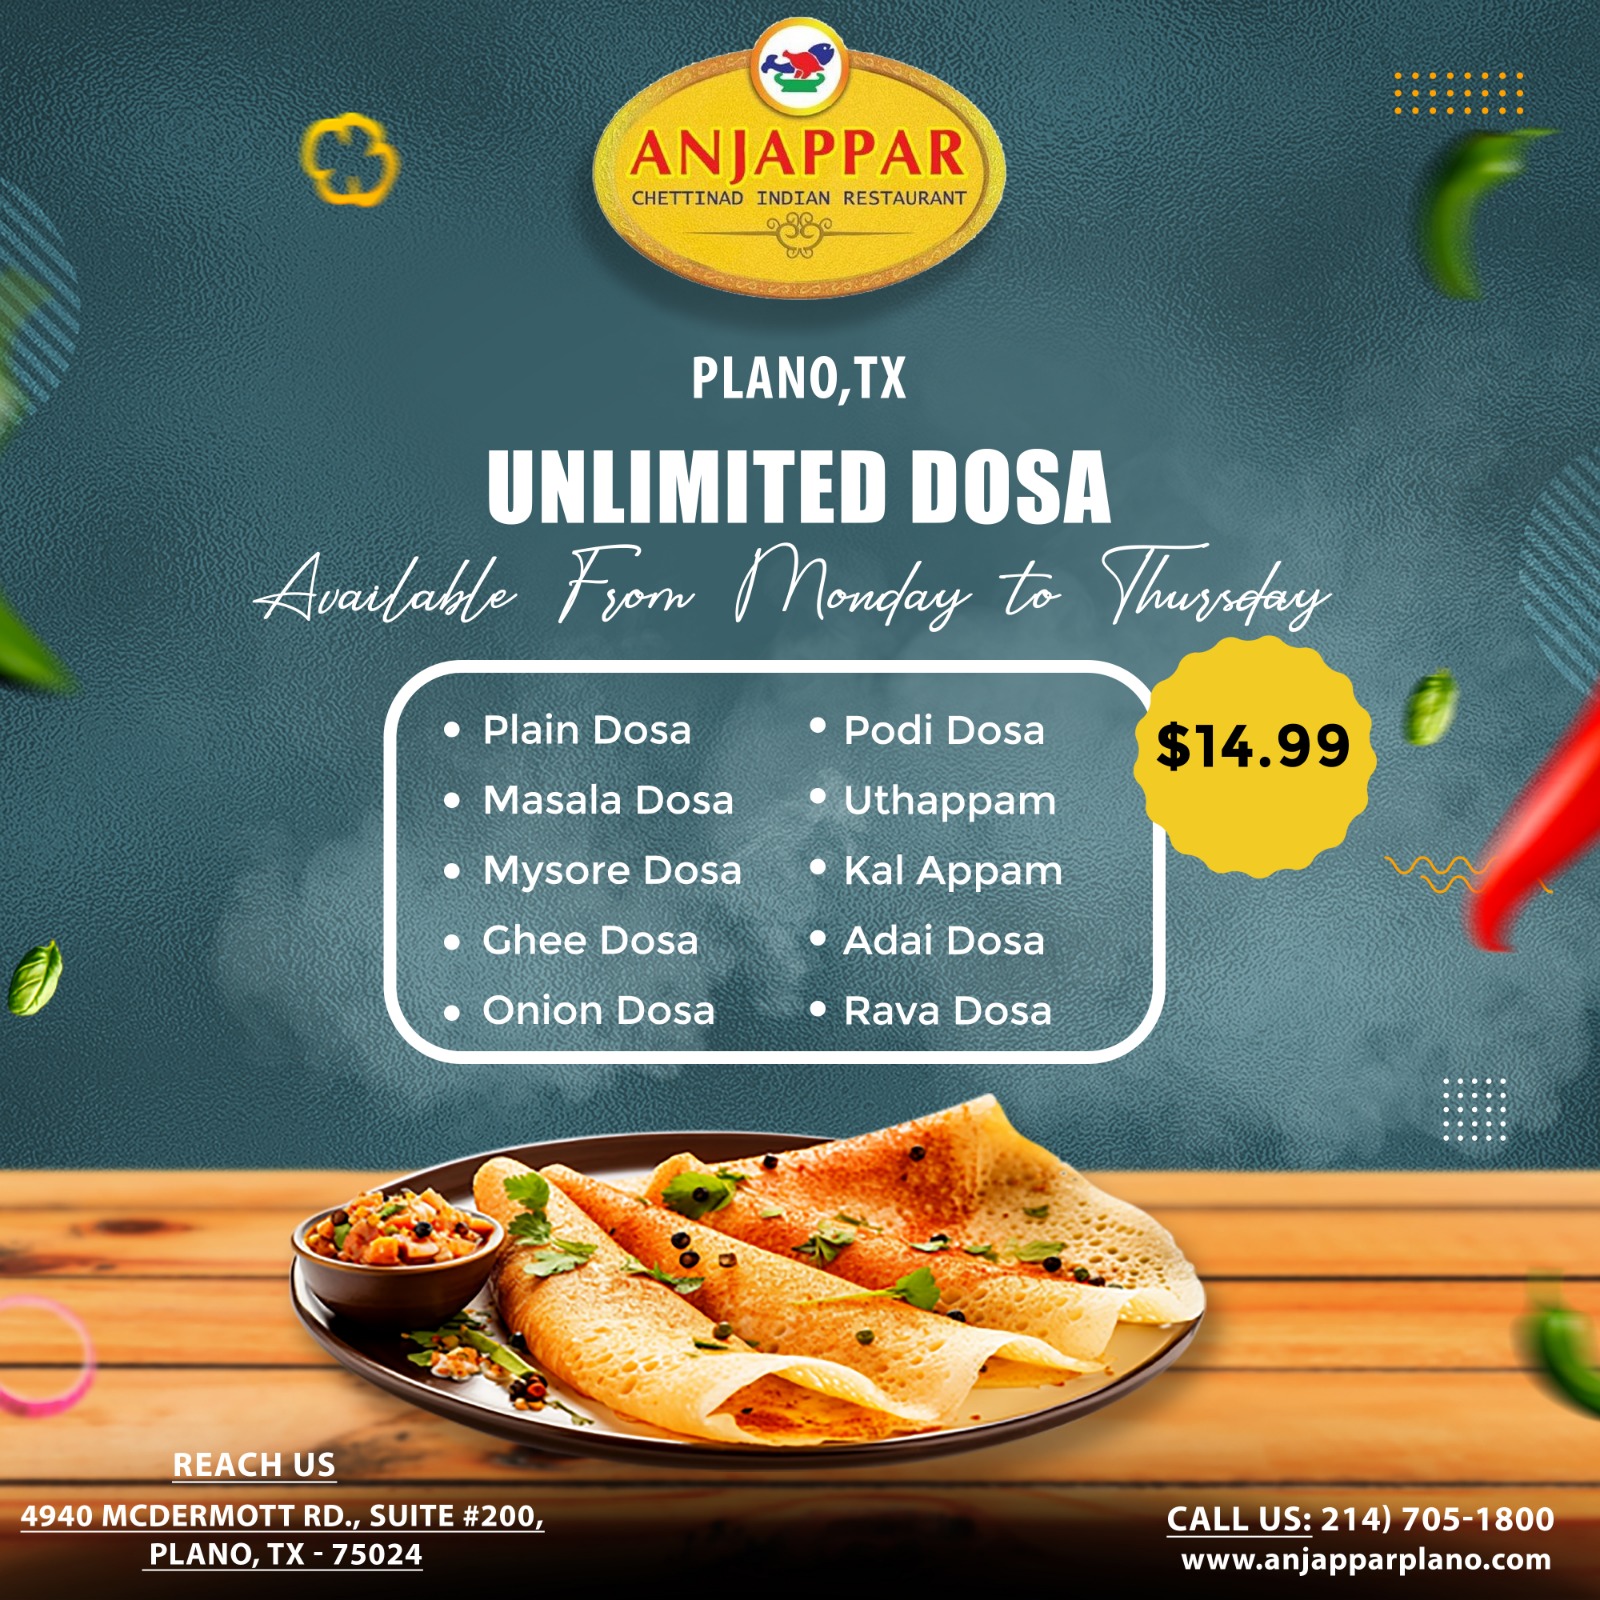 Unlimited Dosa! Available from Monday to Thursday for $14.99 Enjoy a variety of dosas.